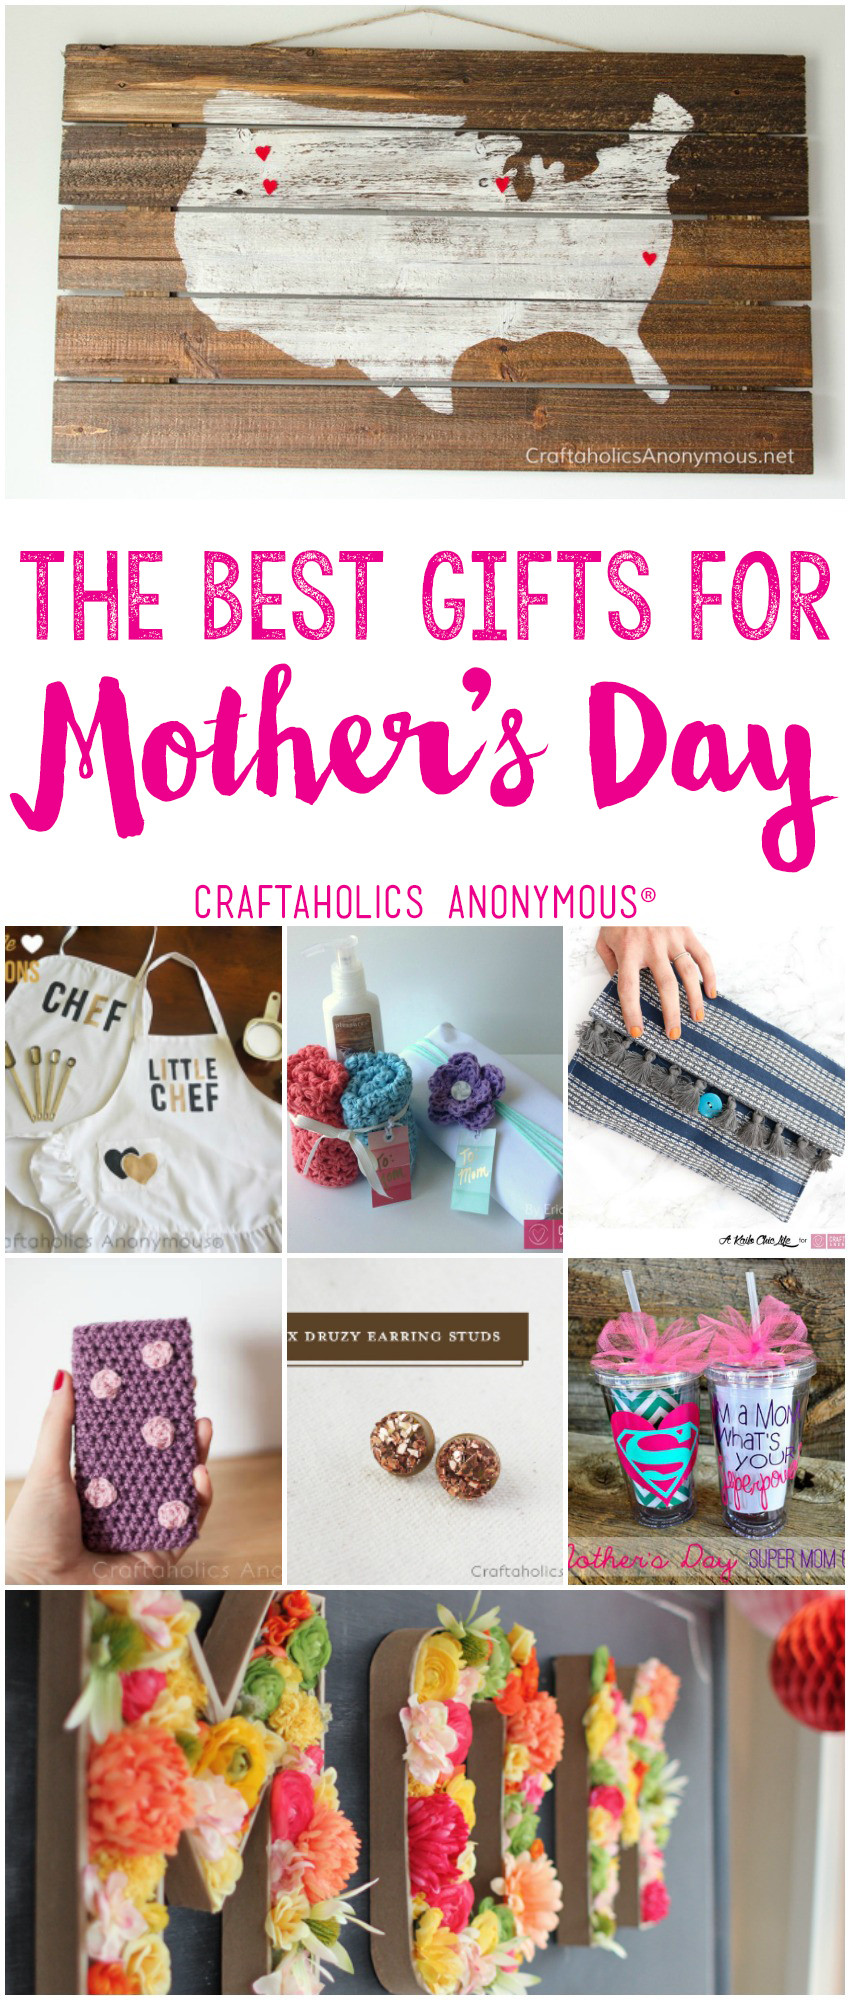 Mother'S Day Gift Ideas For Your Wife
 Craftaholics Anonymous